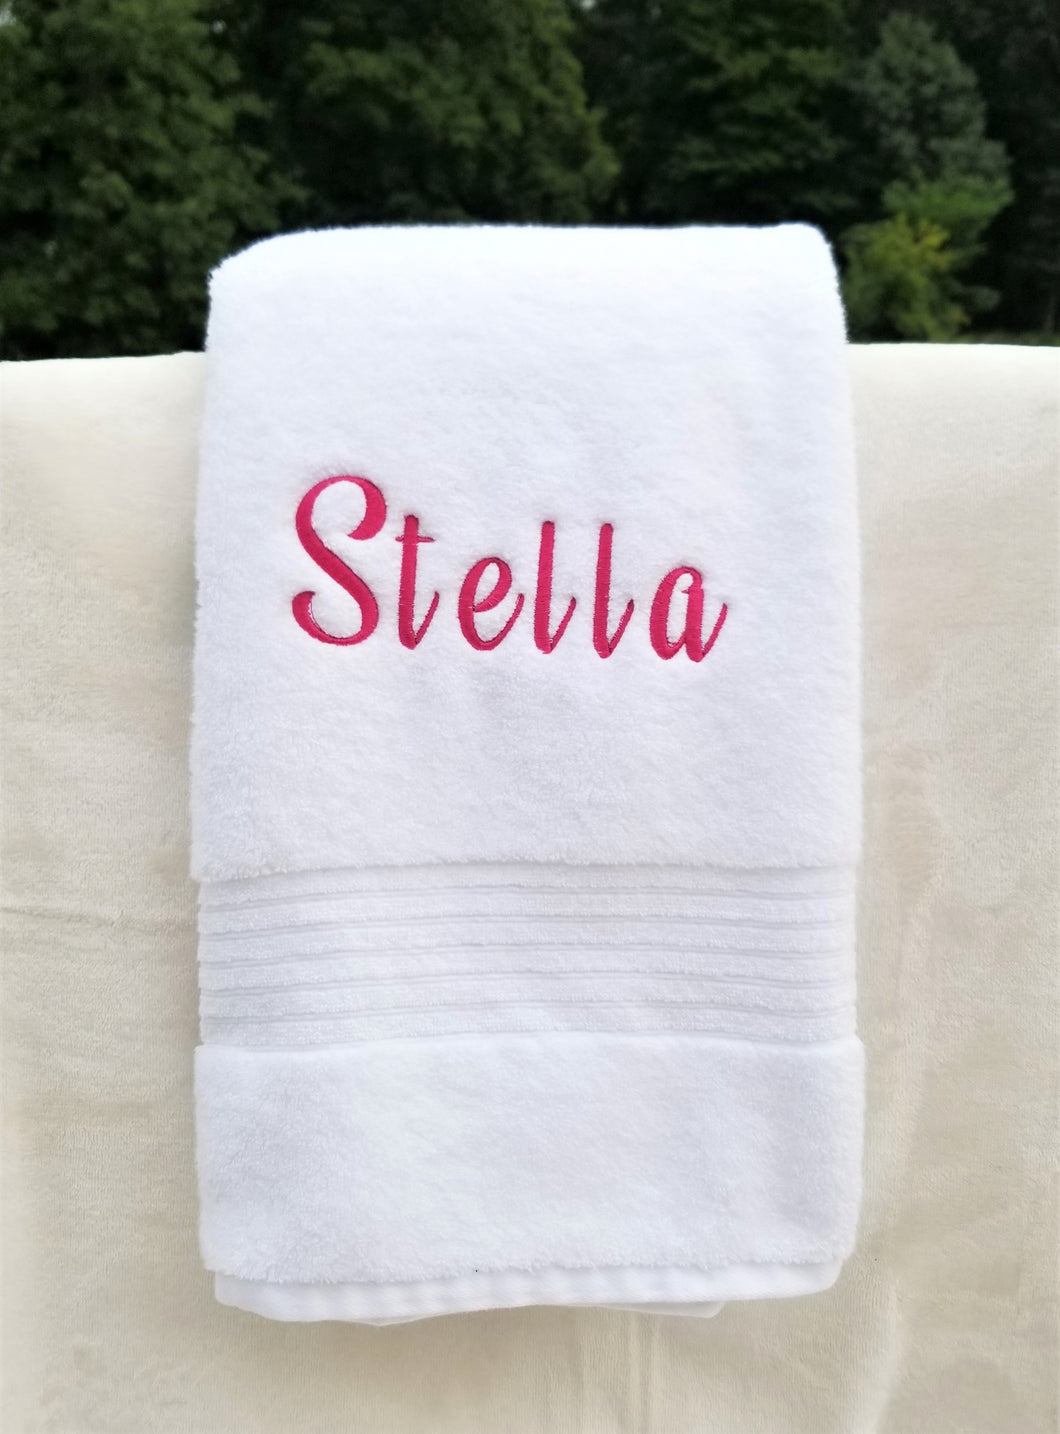 Personalized Towels, Hand Towels, Name Monogram, Personalize Hand